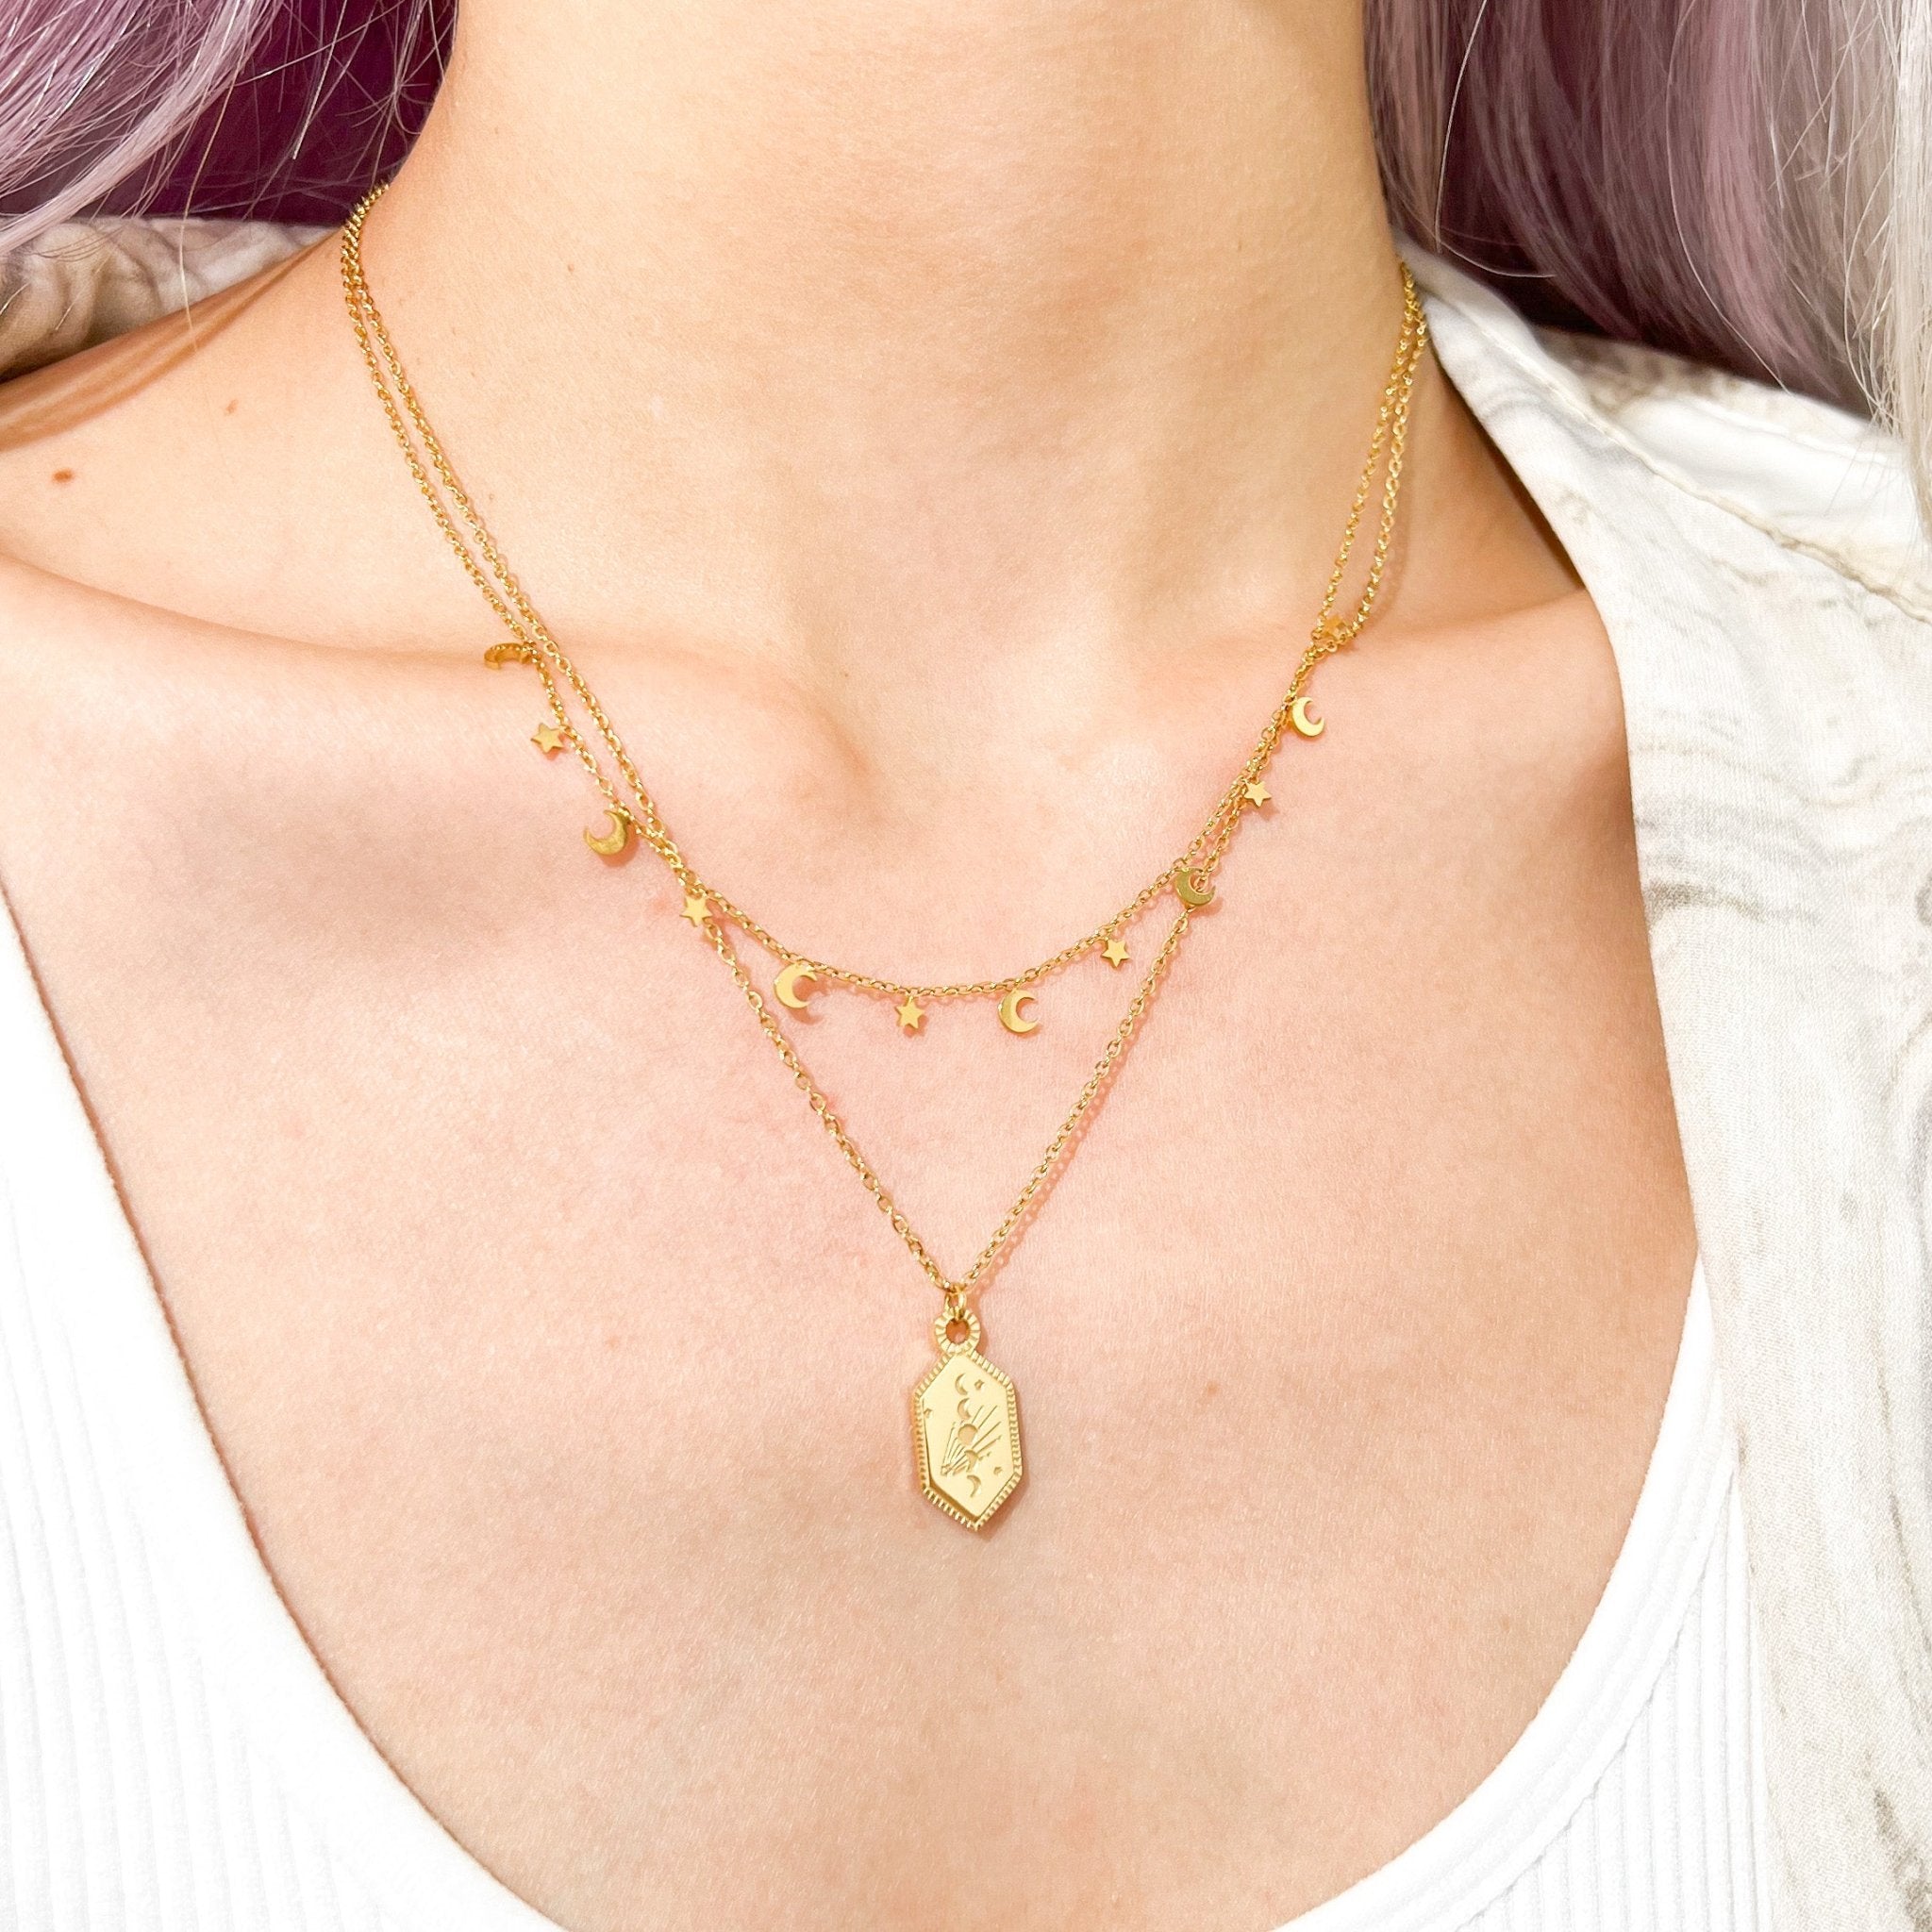 Moon Phases Necklace in Gold - Flaire & Co.